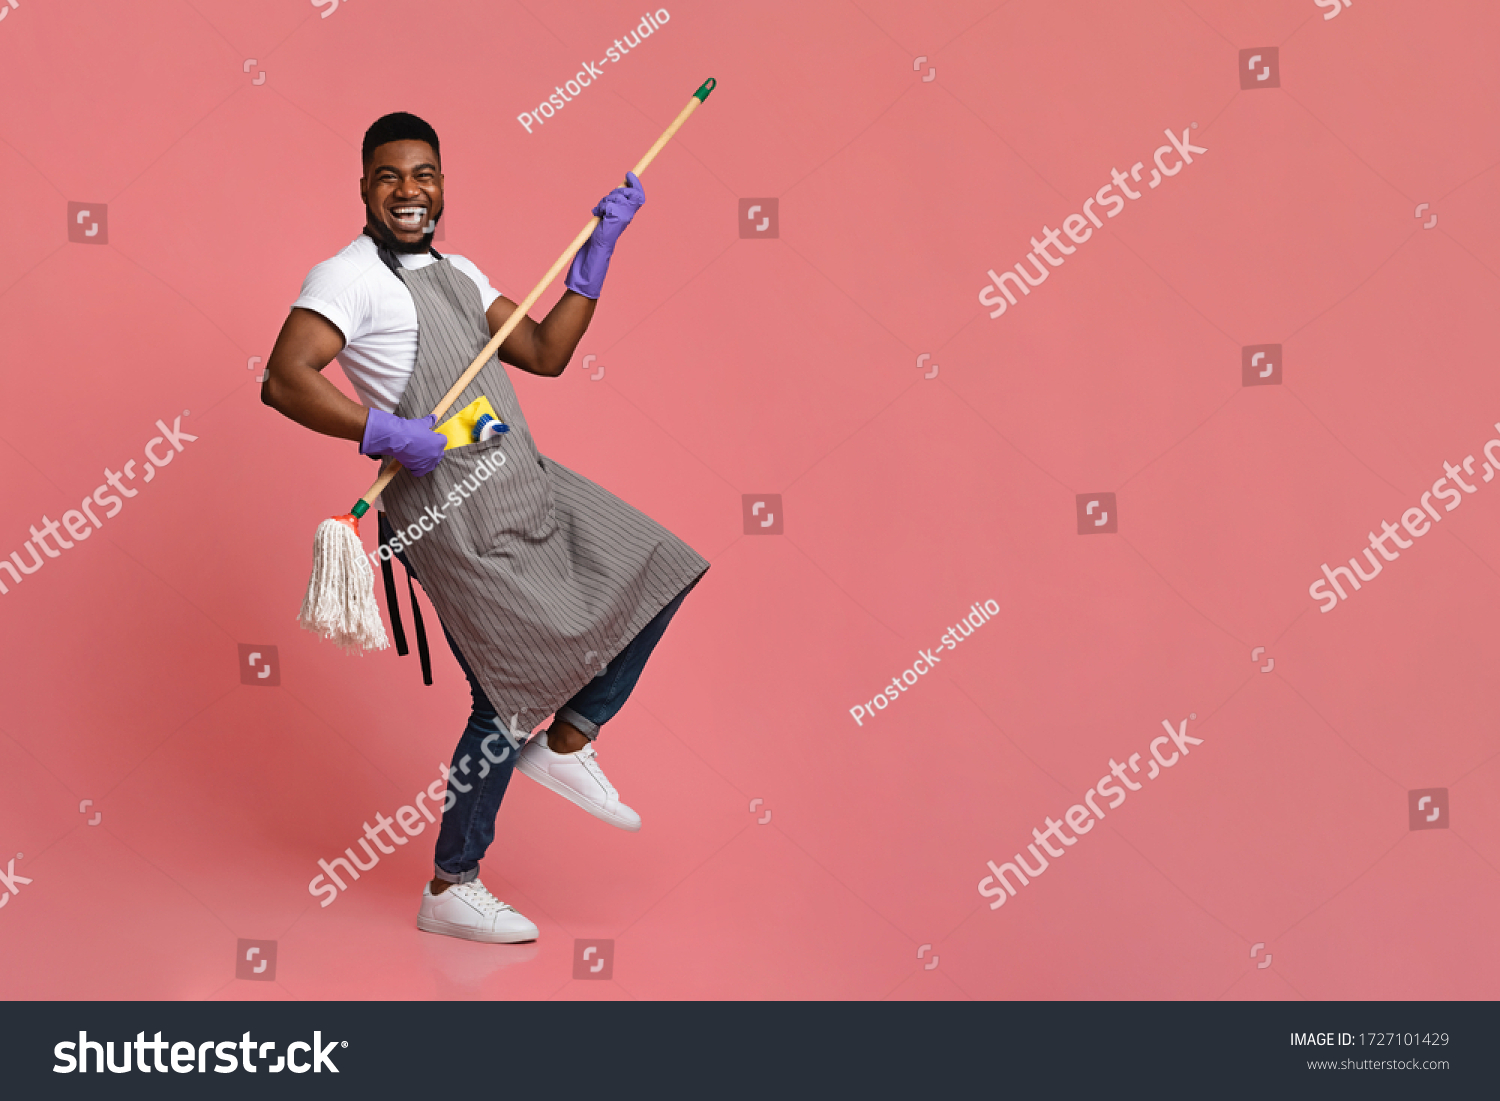 Funny African Man Using Mop Handle As Guitar, Having Fun During Cleaning. Posing Over Pink Background In Studio, Copy Space #1727101429